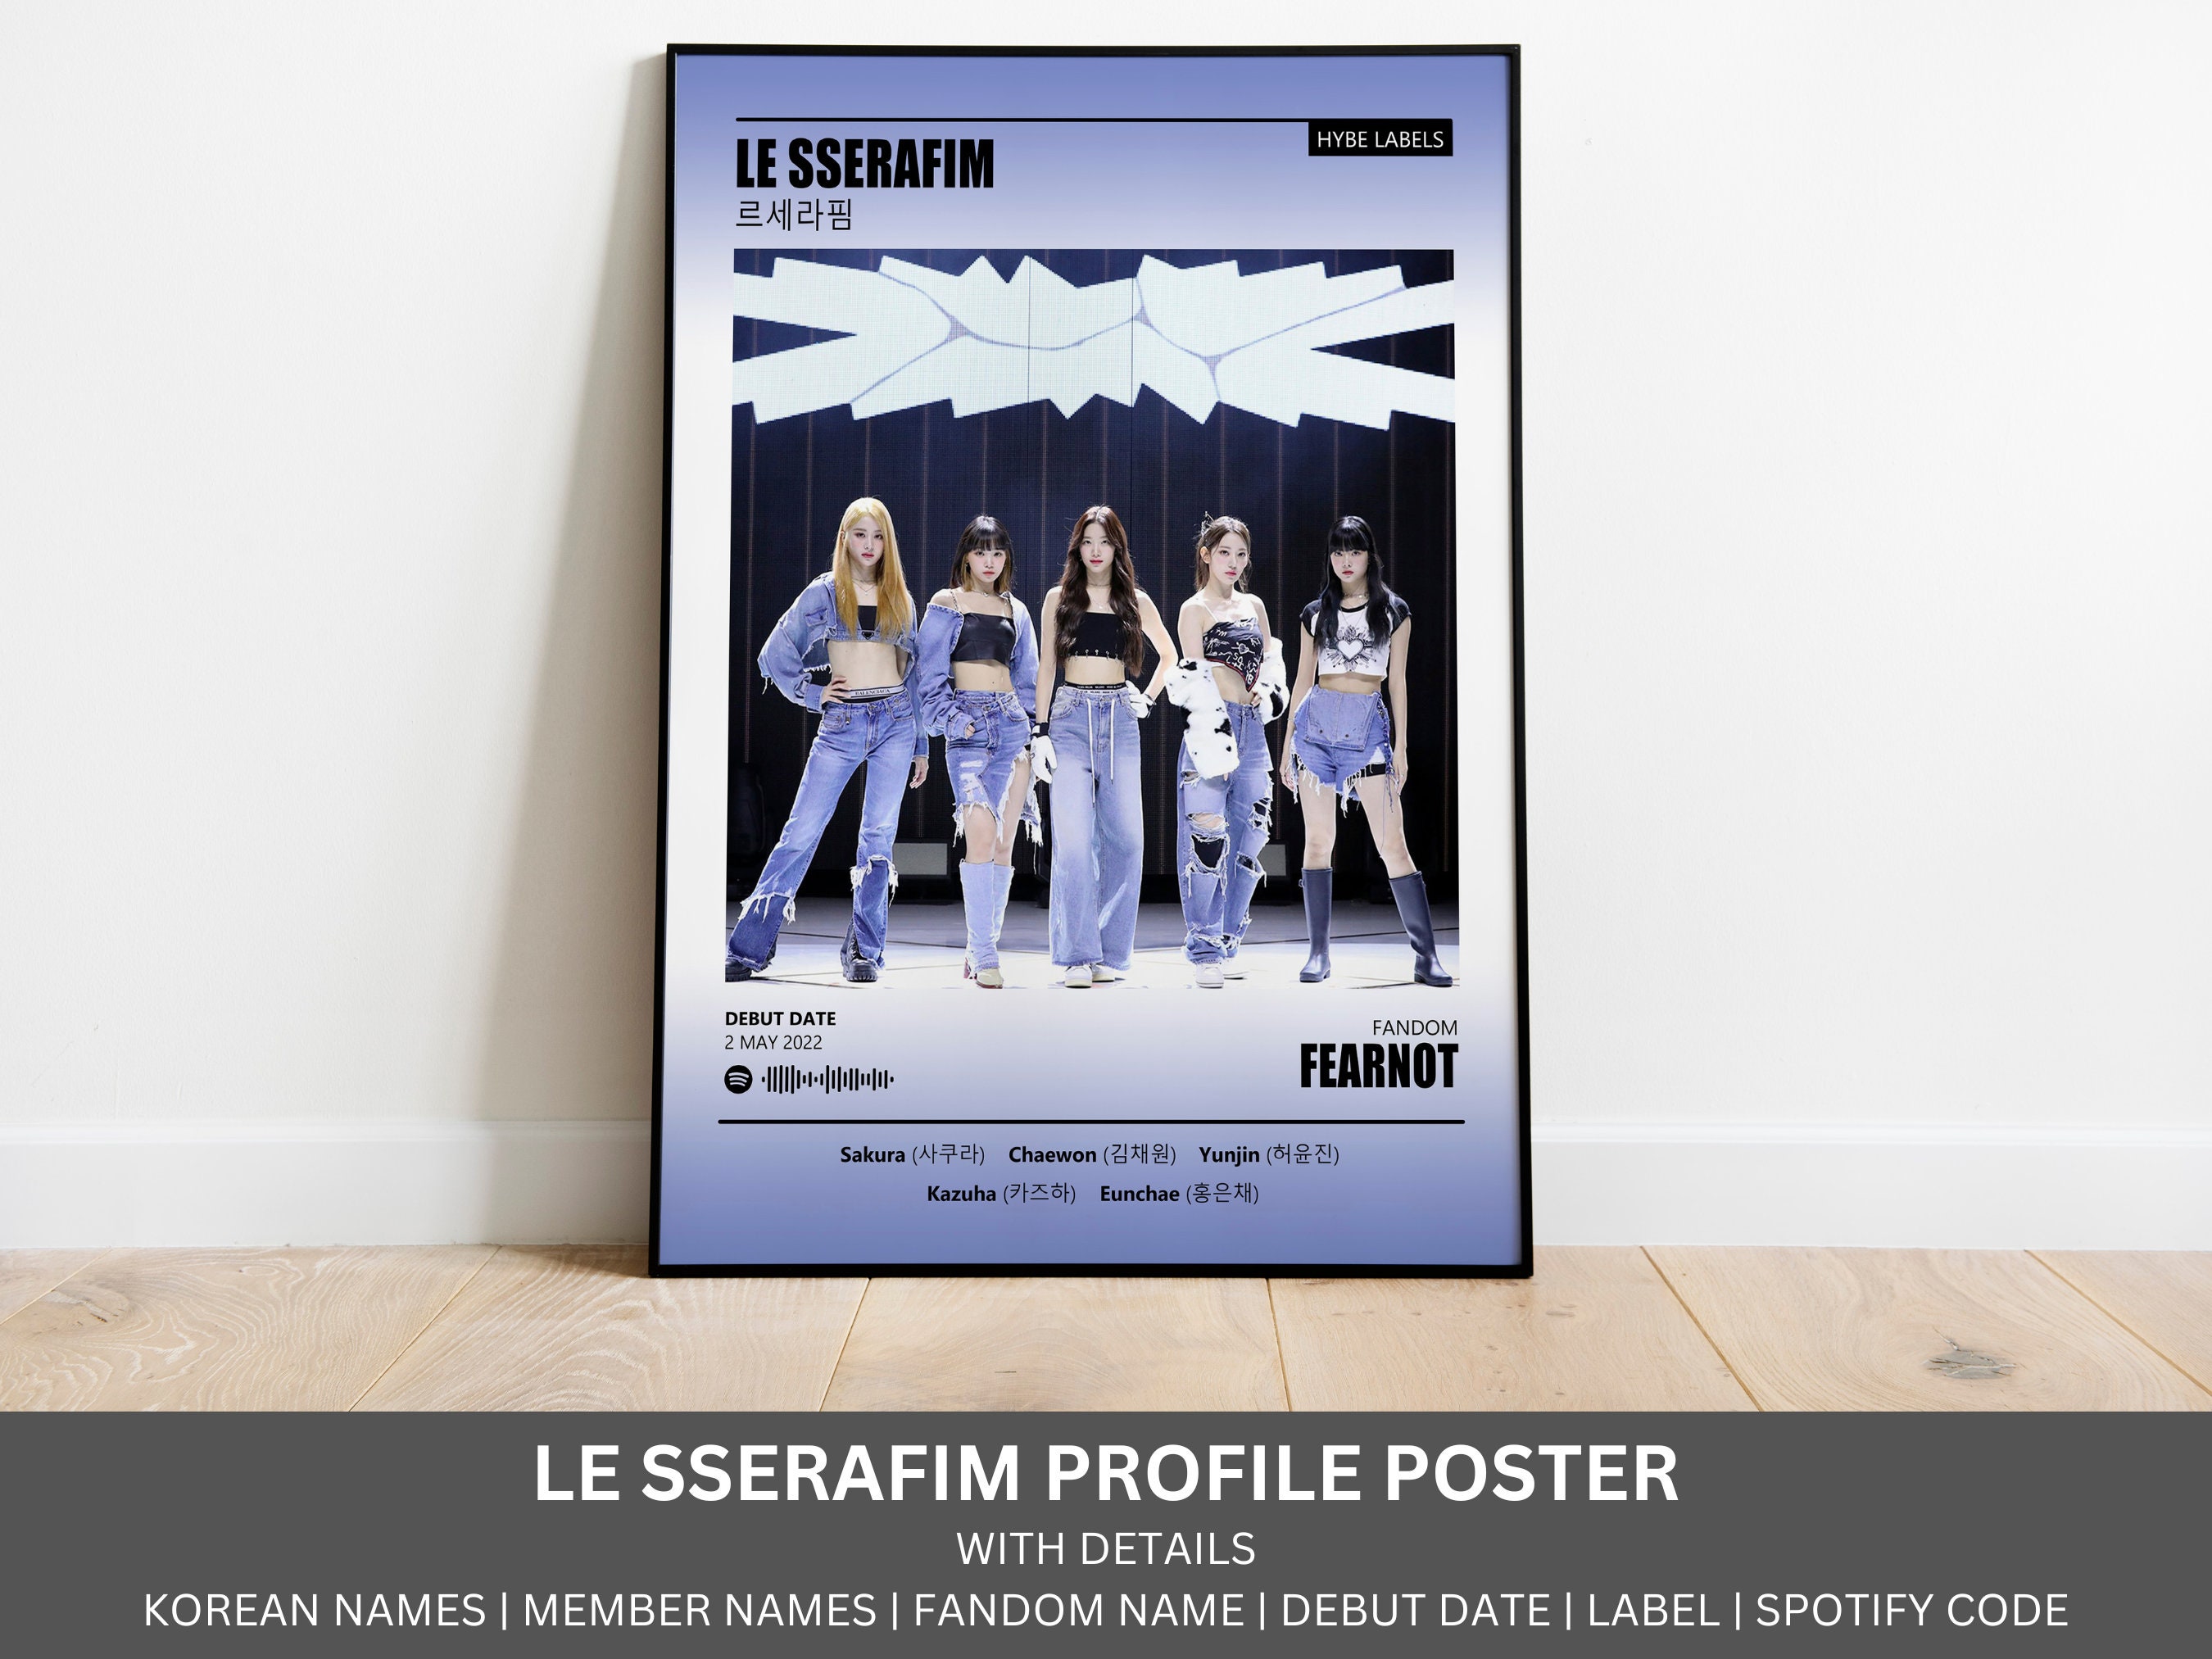 New Jeans Magazine Poster  Pop posters, Kpop posters, Music poster design